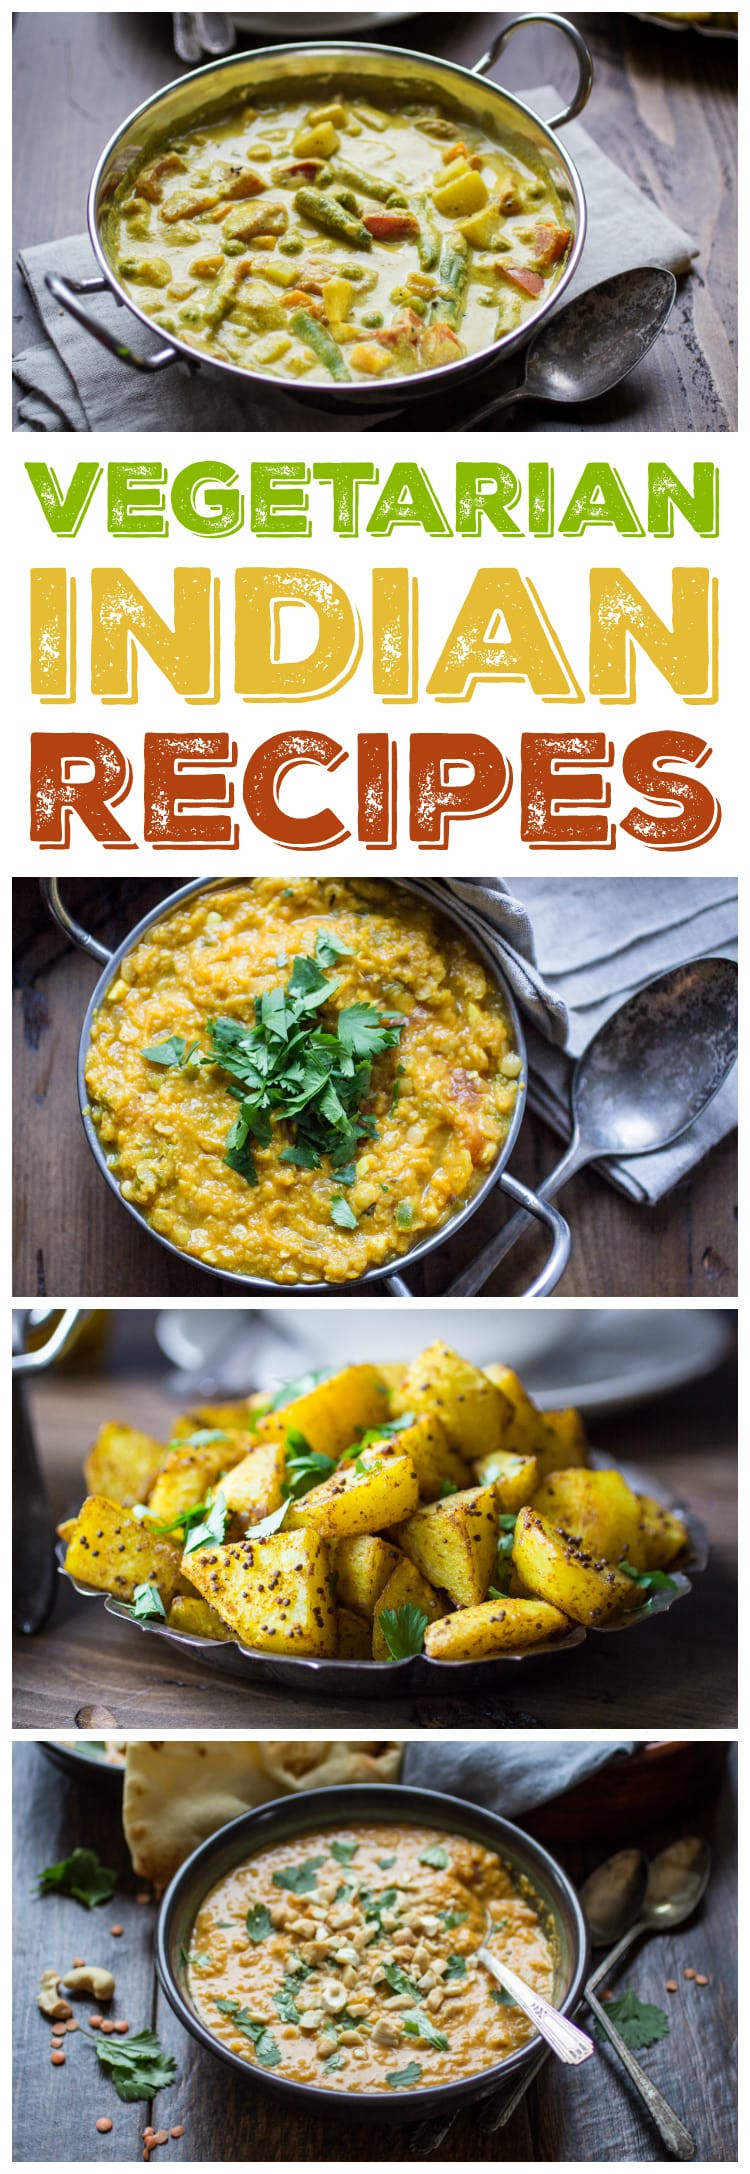 Vegan Indian Food Recipes
 10 Ve arian Indian Recipes to Make Again and Again The